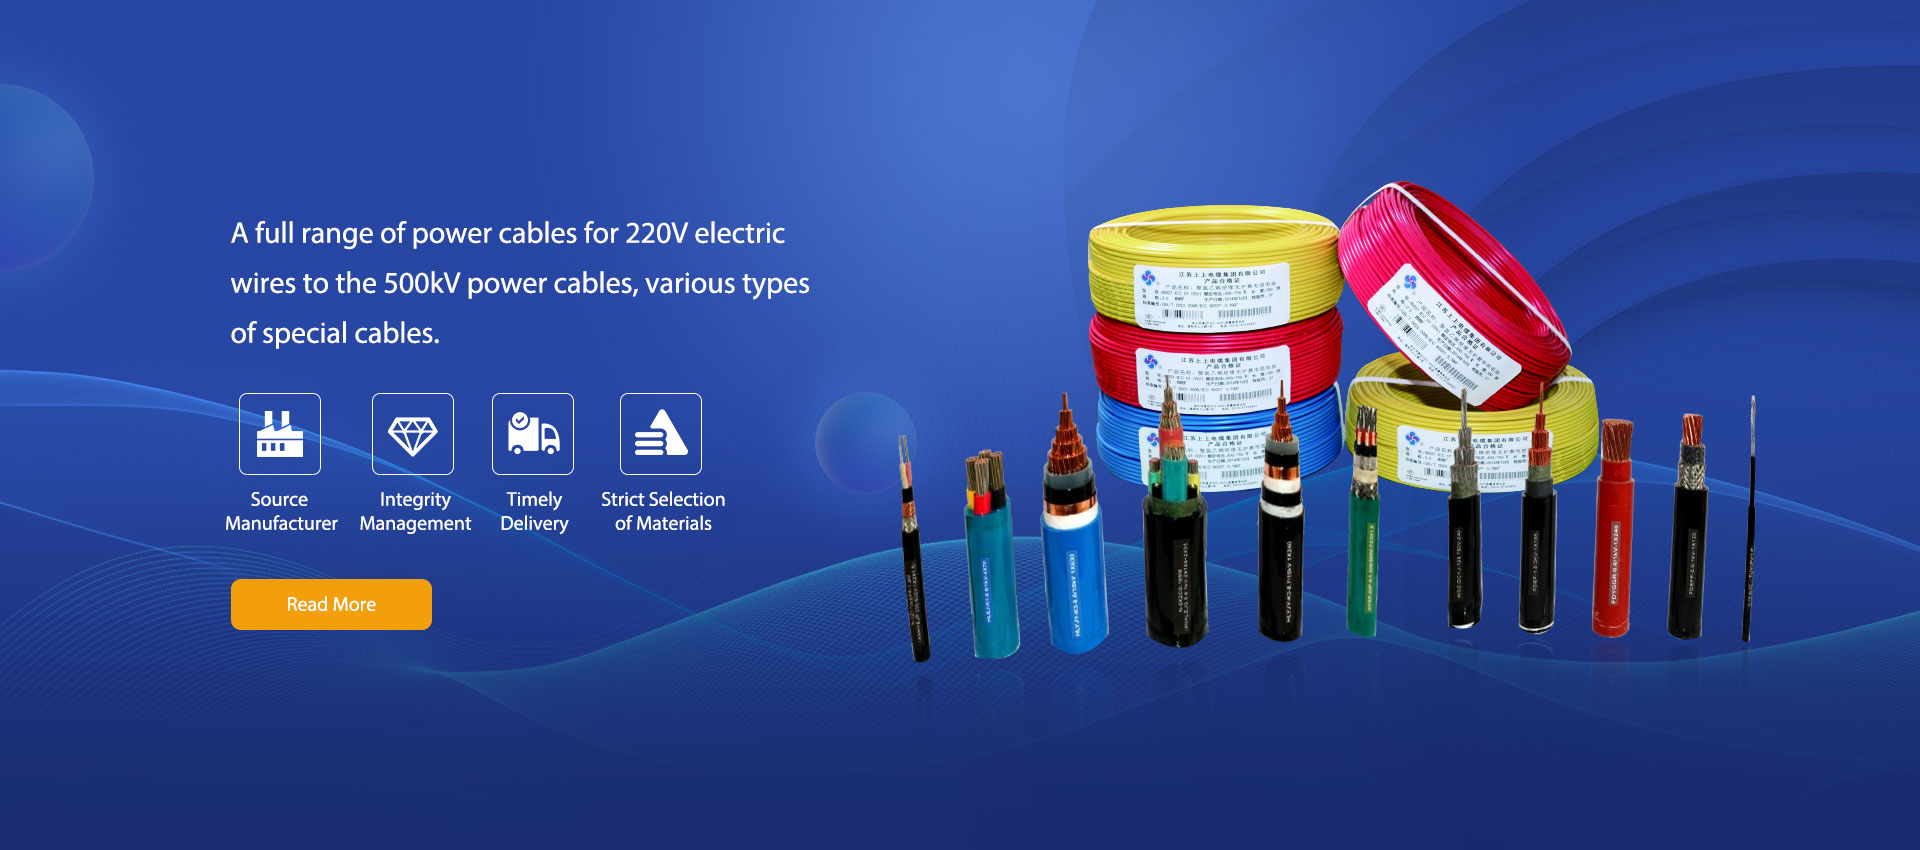 A full range of power cables for 220V electric wires to the 500kV power cables